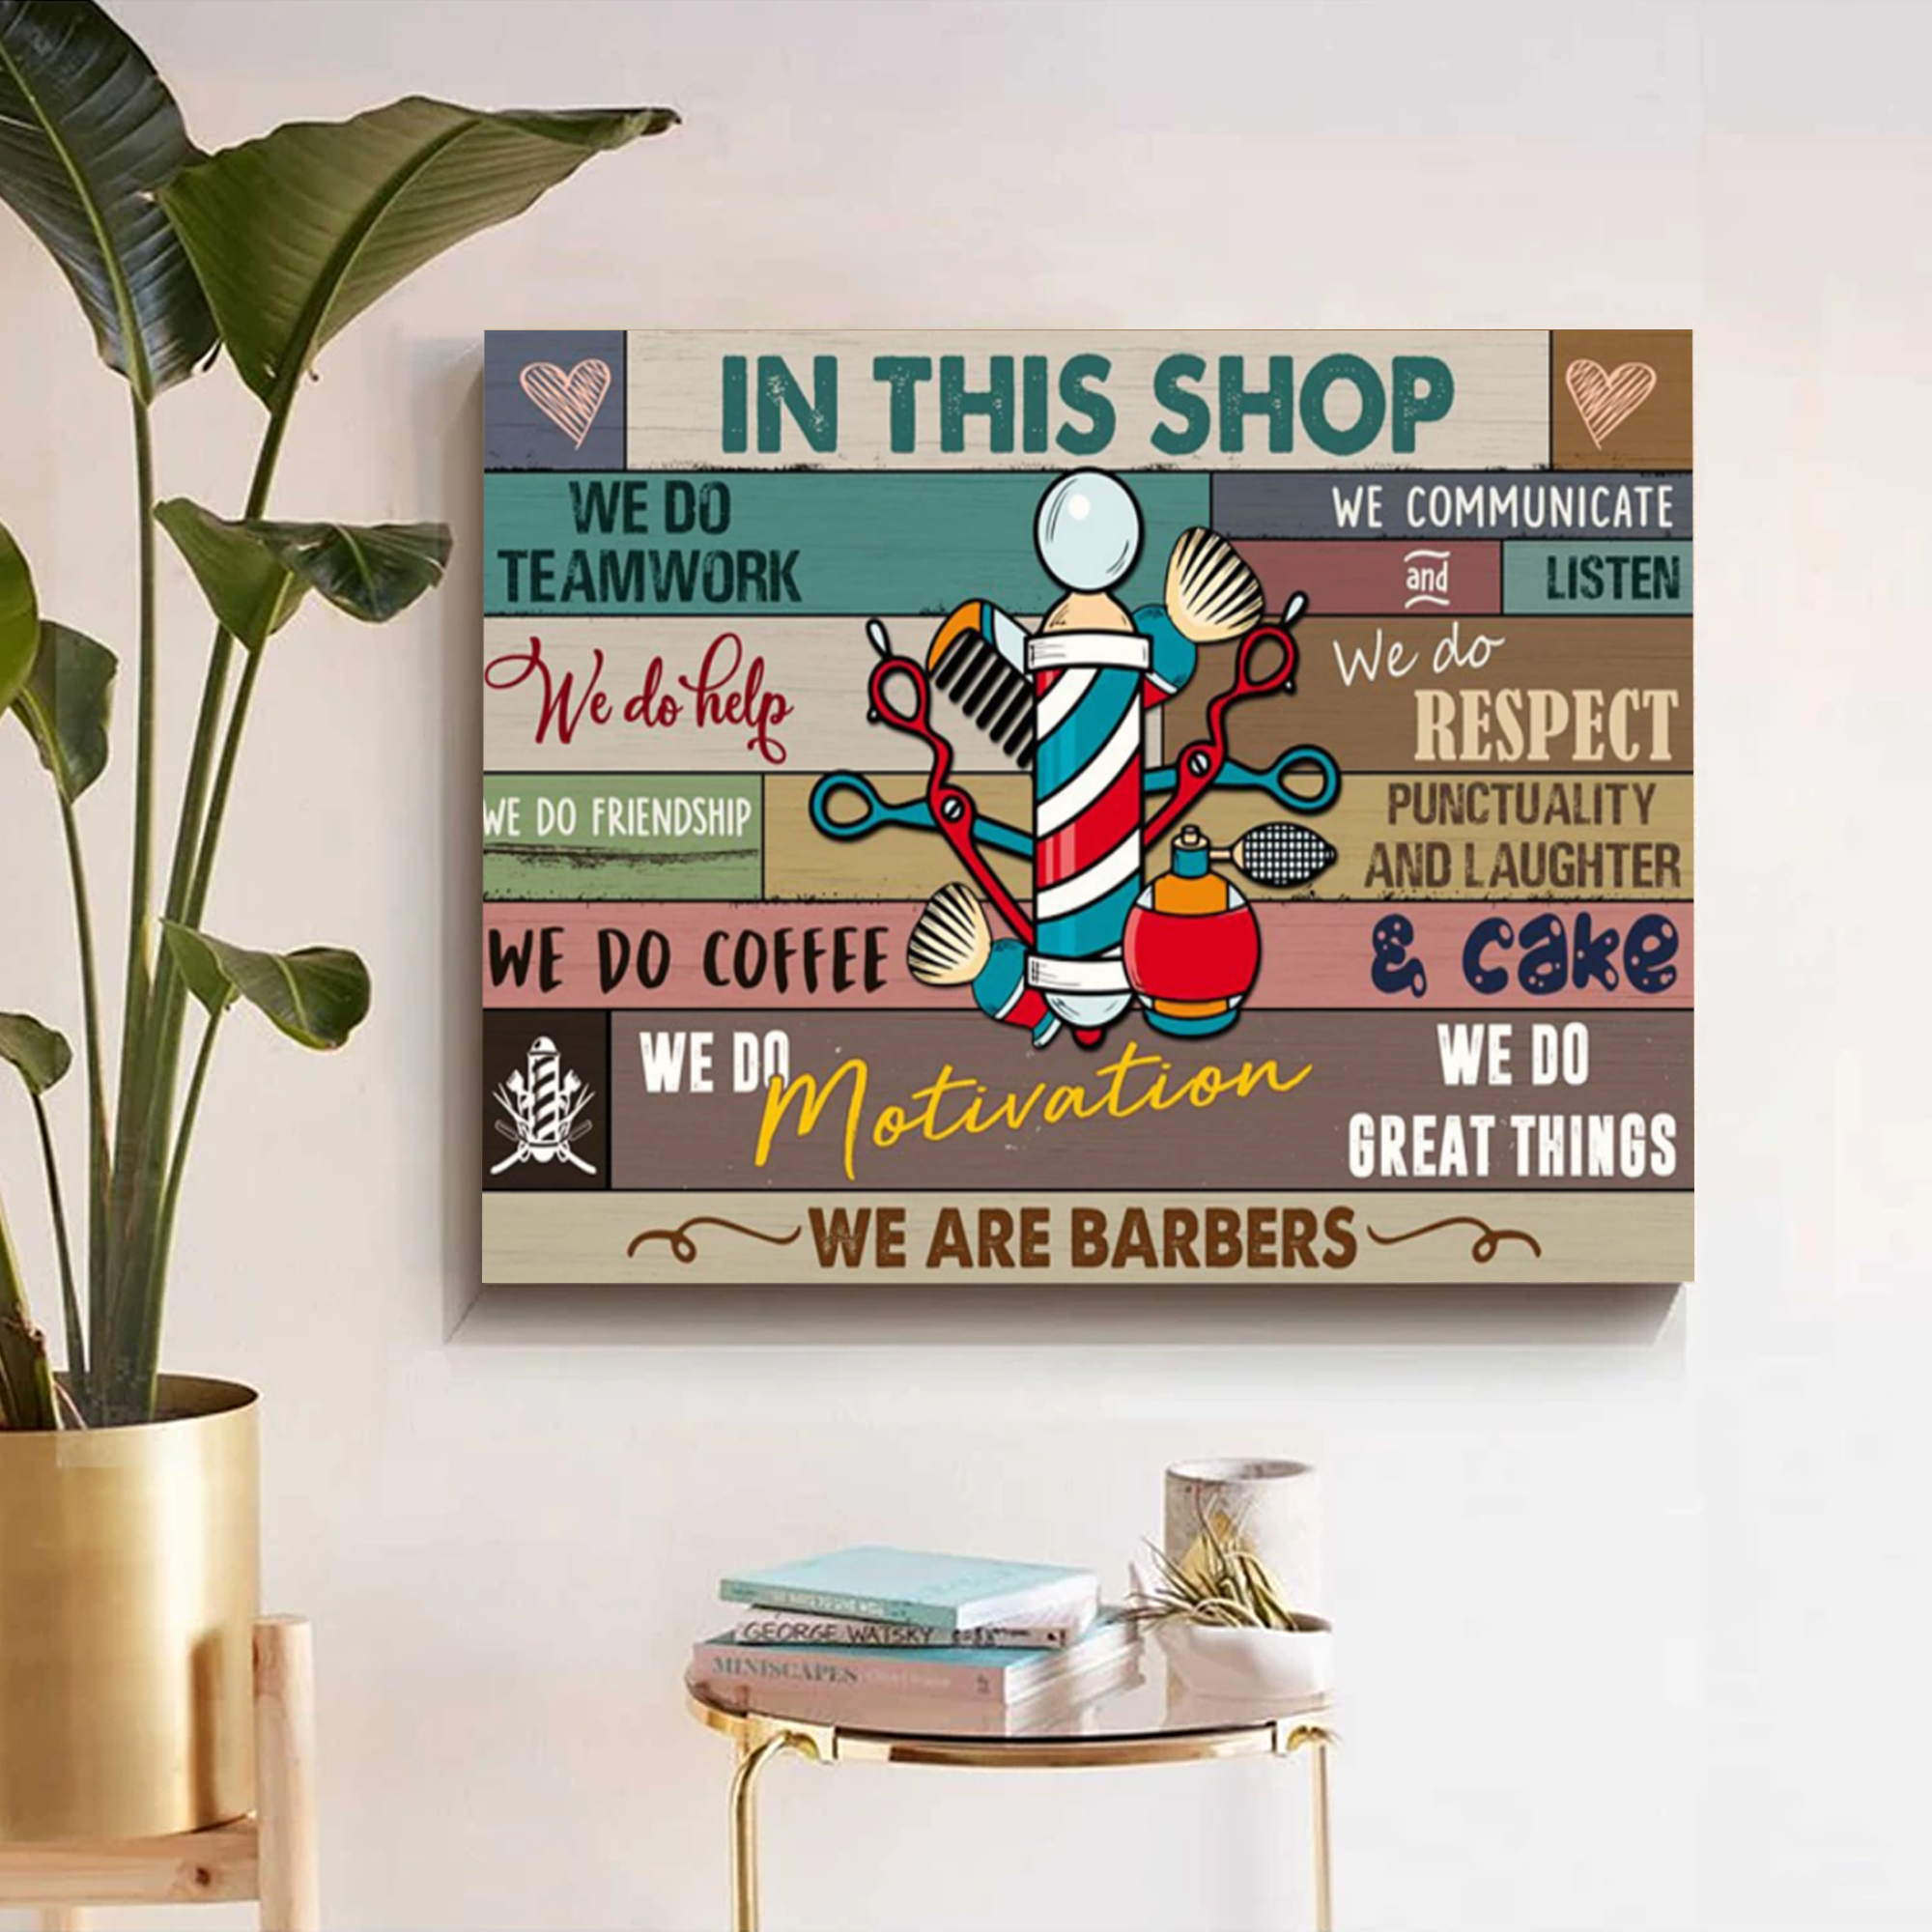 Hairstylist Canvas Wall Art – In This Shop We Are Barbers